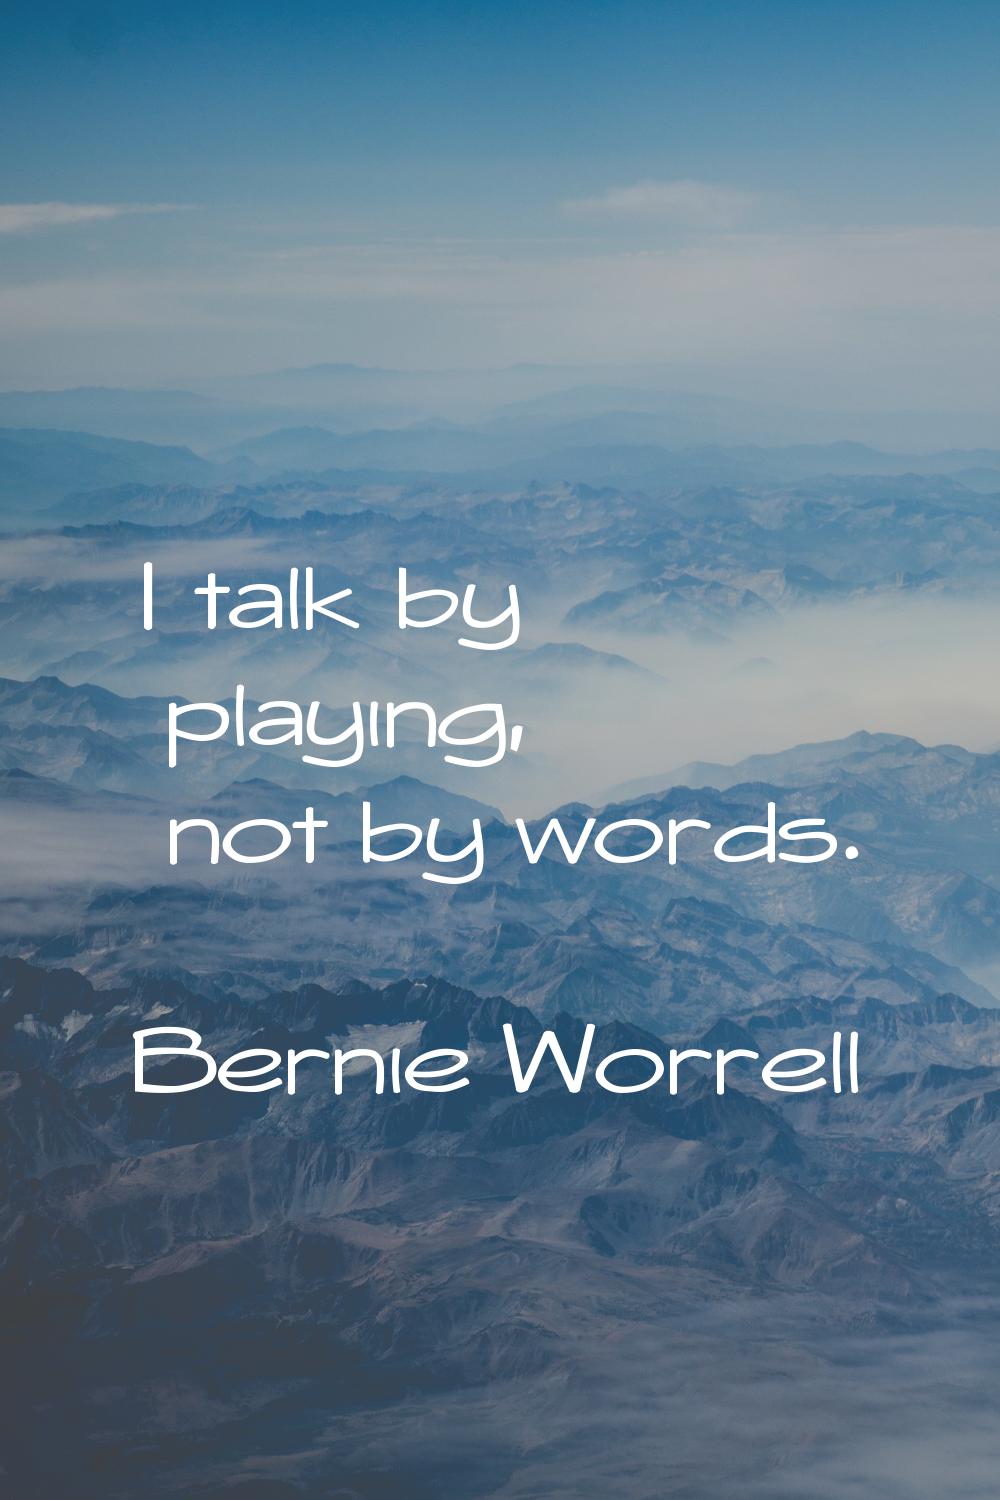 I talk by playing, not by words.